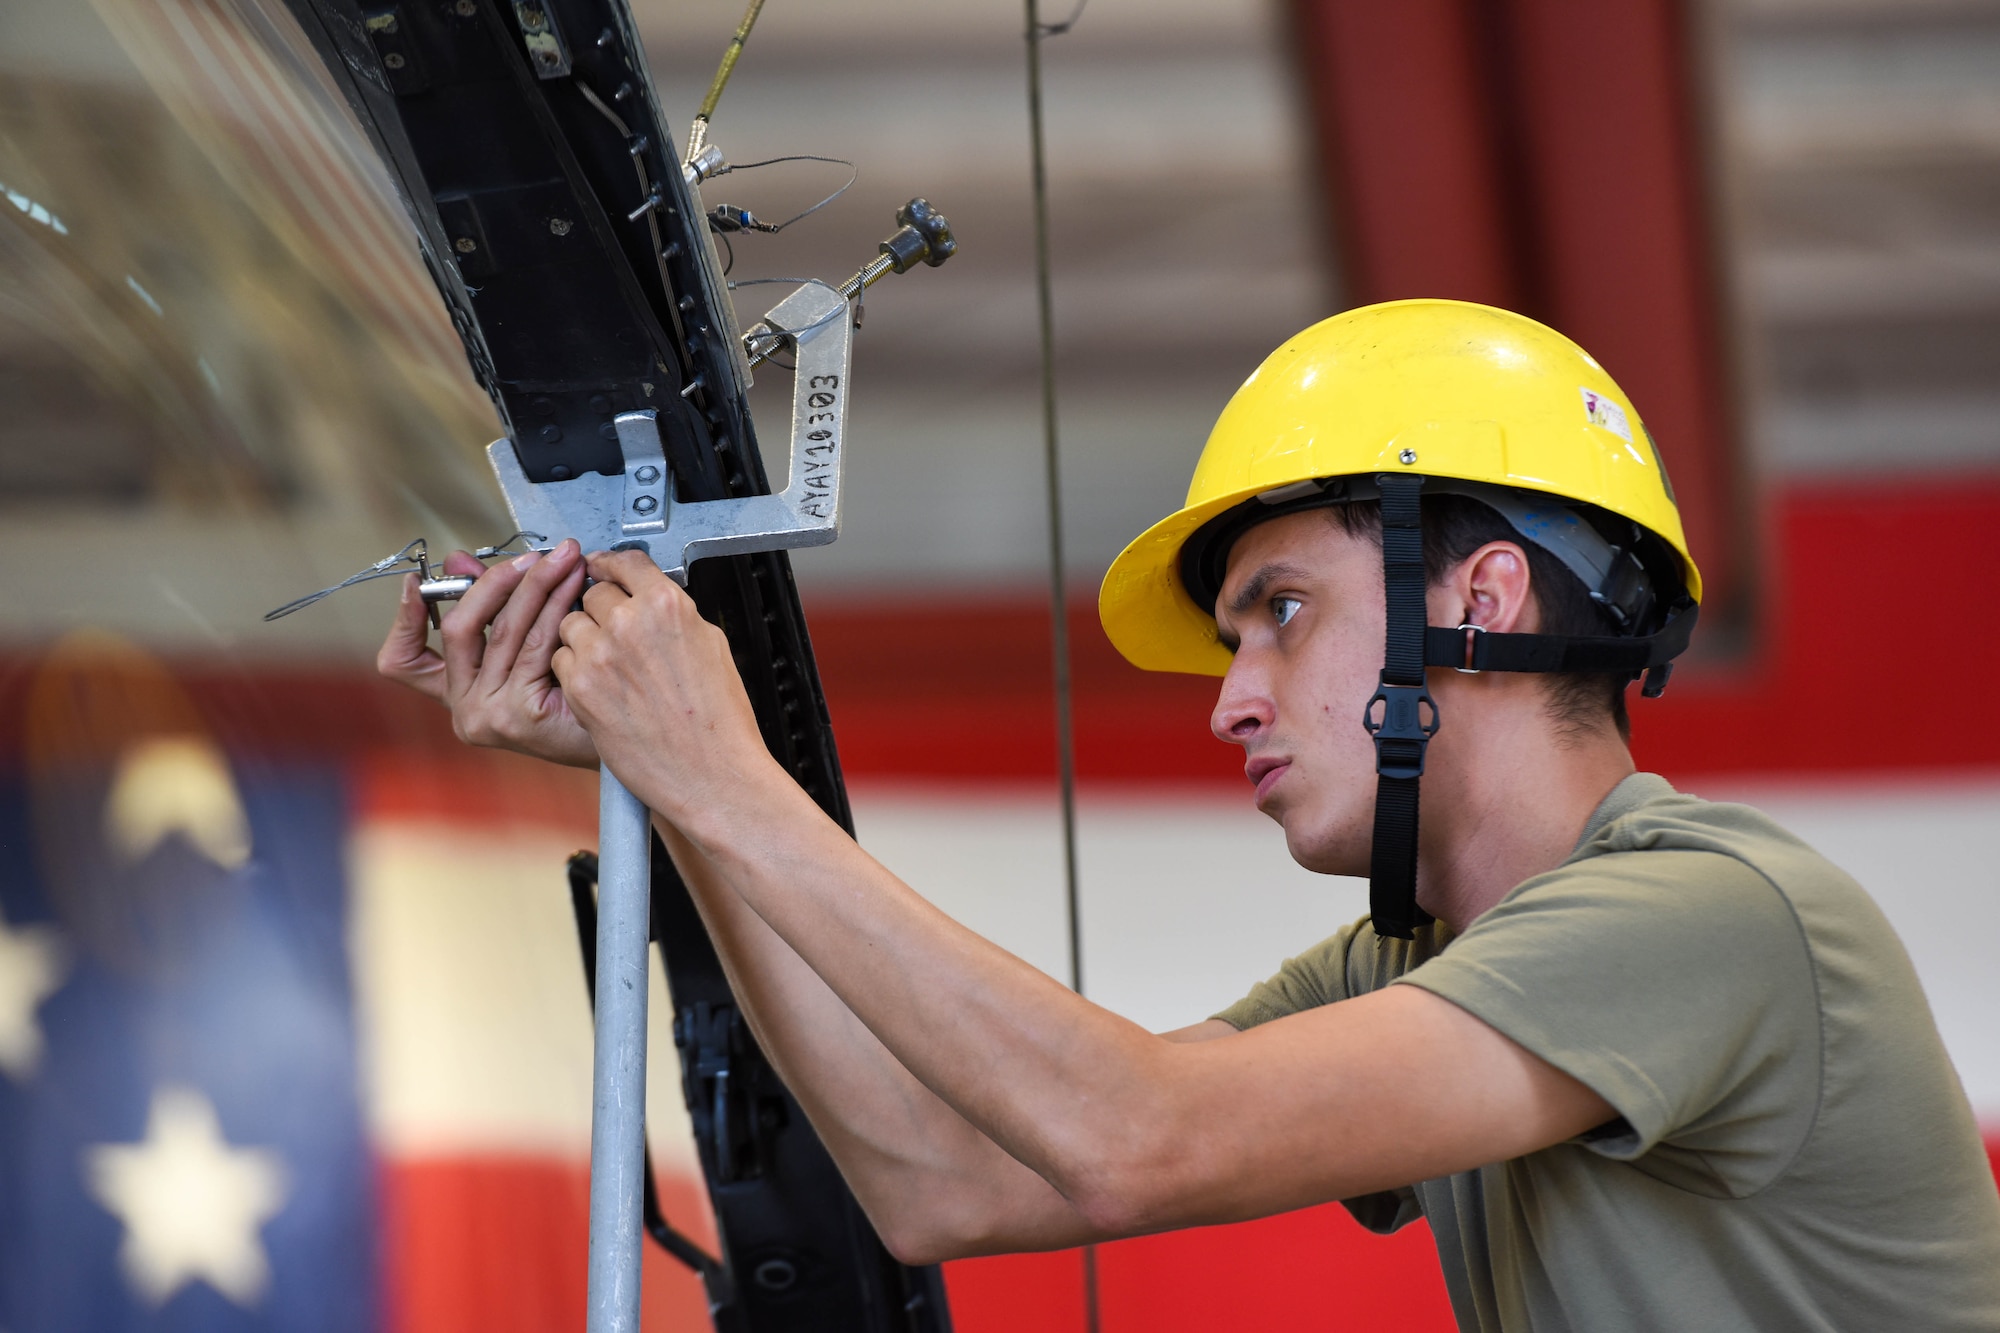 Senior Airman Andres Espinoza, 31st Maintenance Squadron Egress journeyman, pins a canopy support strut on an F-16 Fighting Falcon at Aviano Air Base, Italy, Aug. 11, 2022. Egress specialists perform inspections and maintenance on F-16 Fighting Falcon canopies and egress systems to ensure the components function properly in flight and during emergencies. (U.S. Air Force photo by Senior Airman Brooke Moeder)